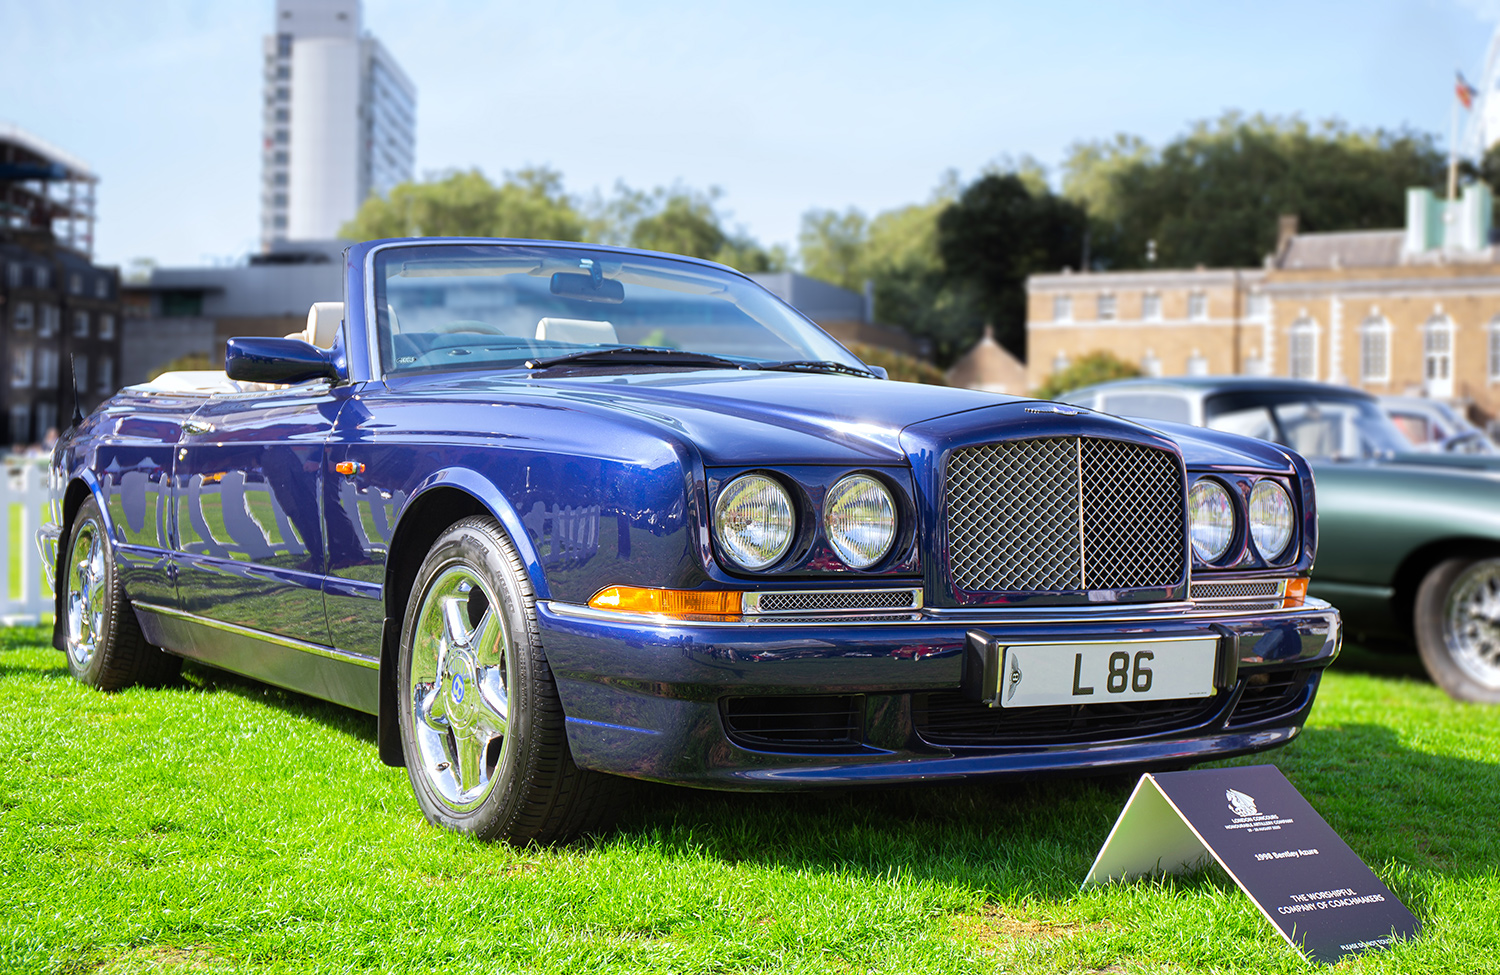 Blue Bentley Azure Convertible on display at London Concours 